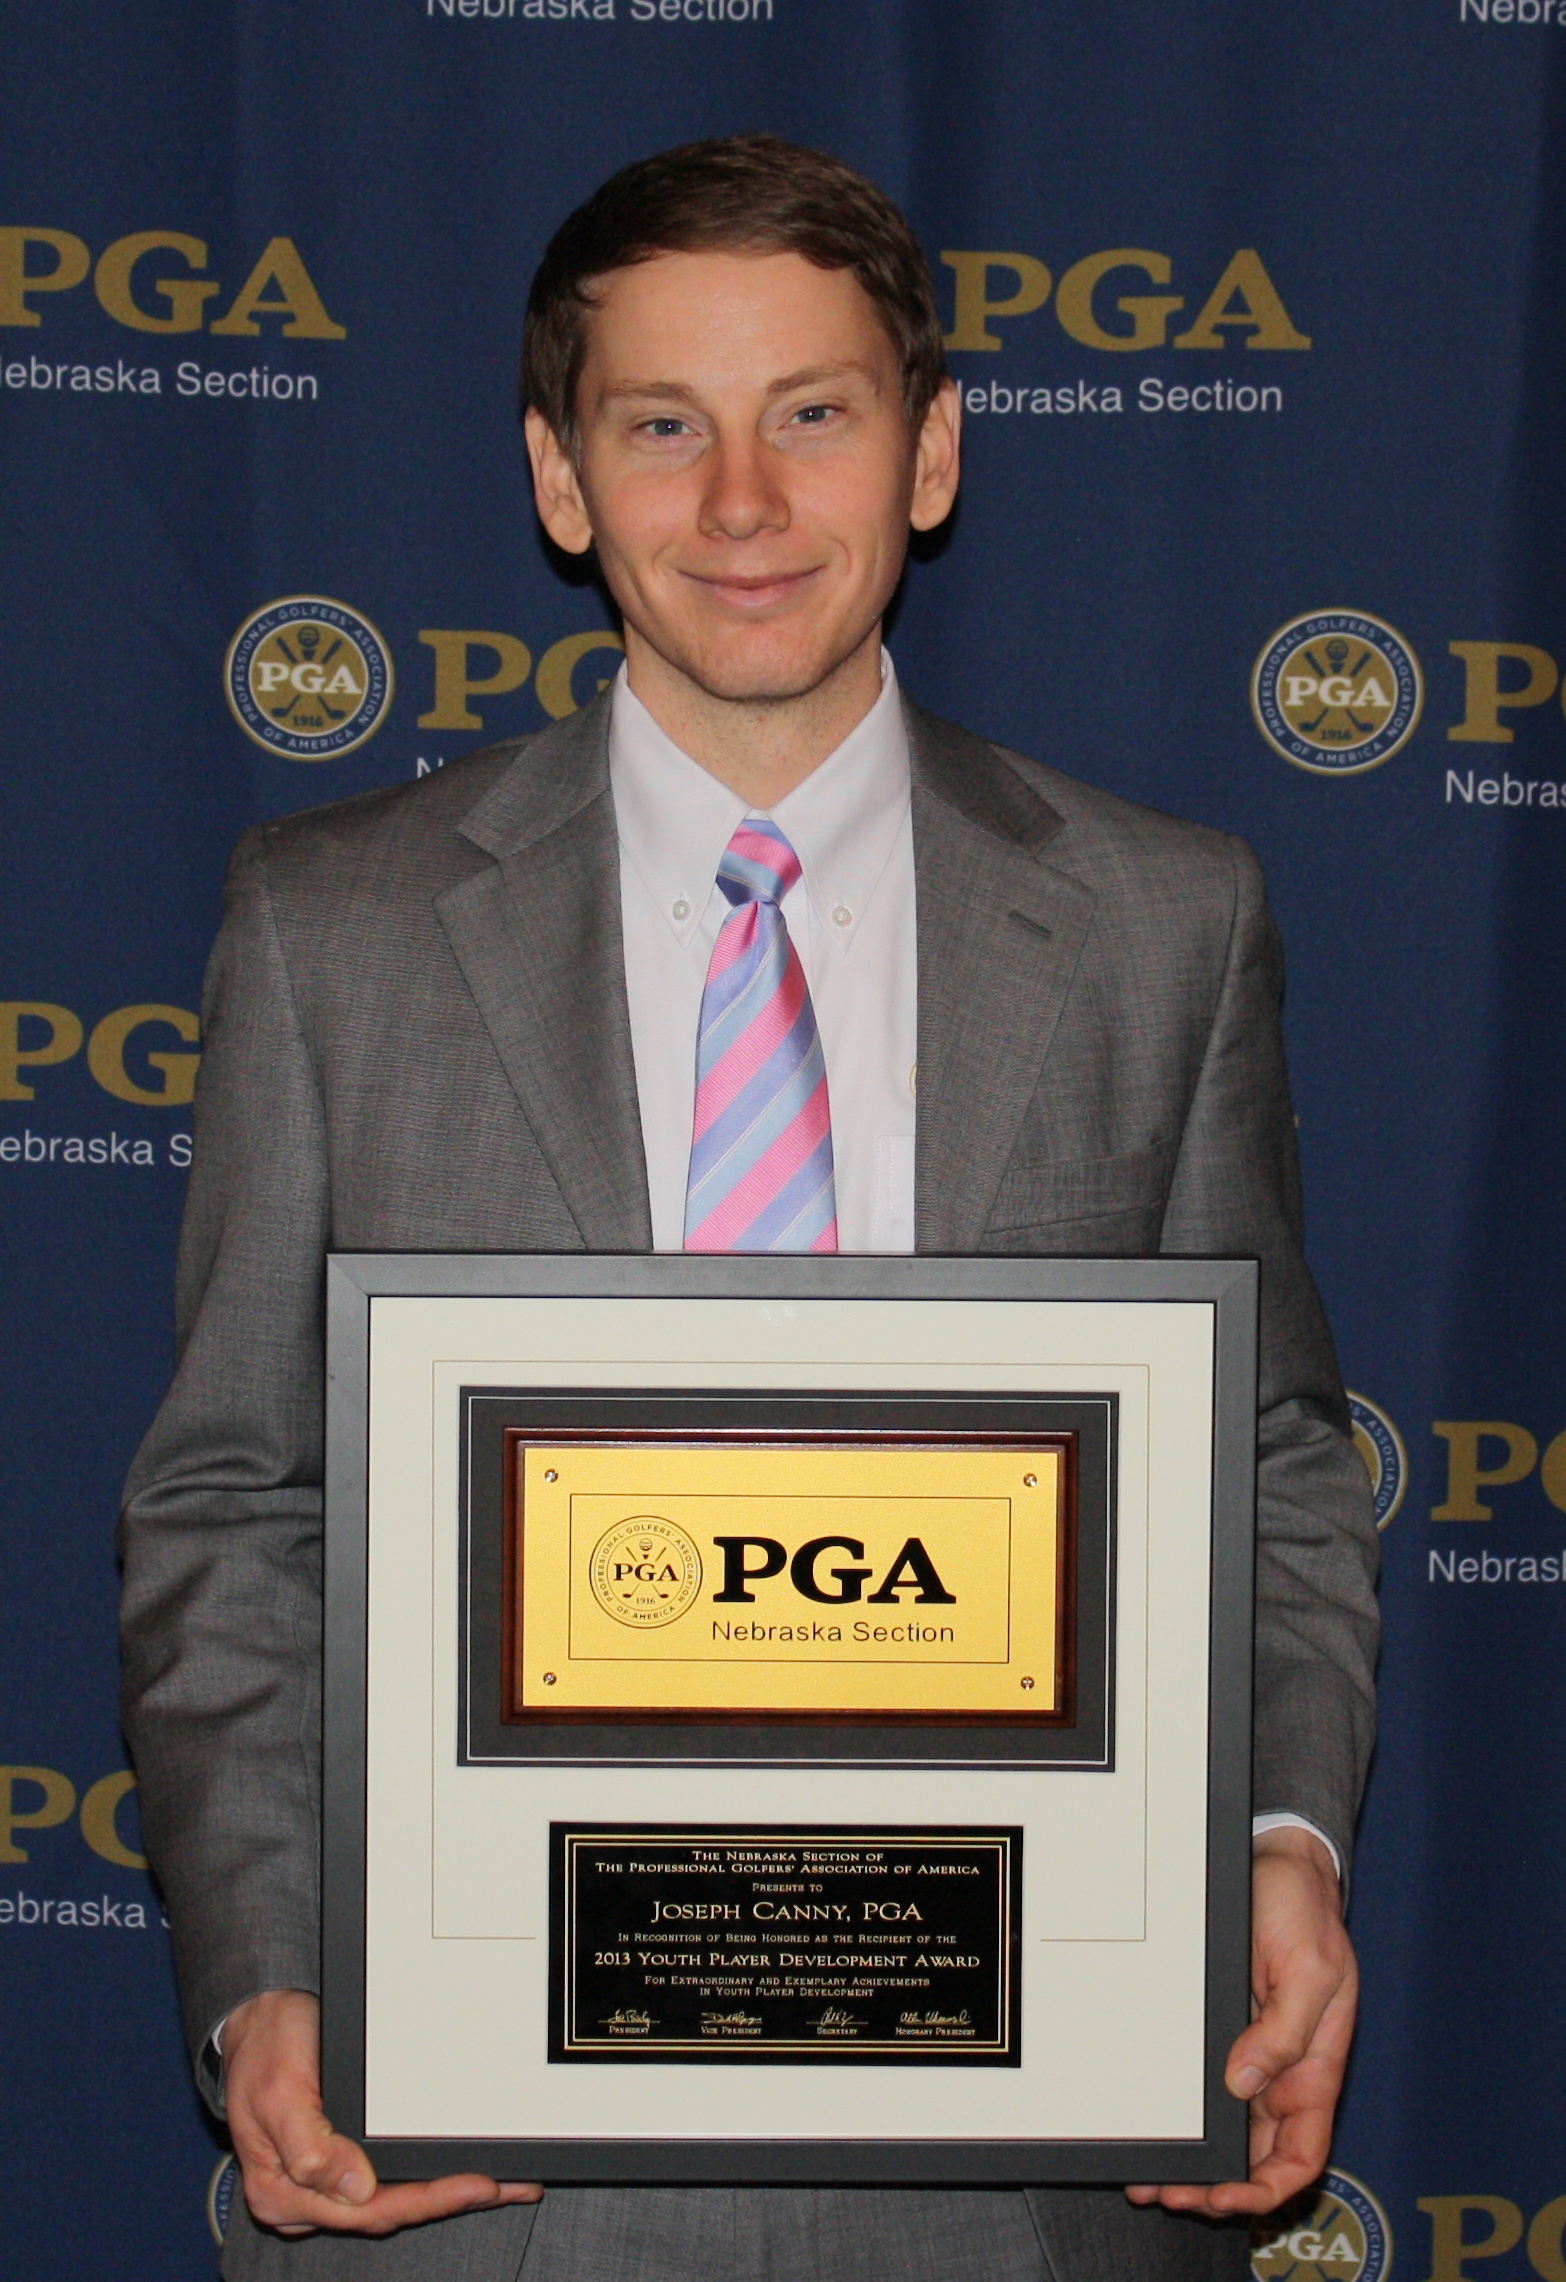 Joe Canny, PGA Professional and Assistant Professor of Practice in the PGA Golf Management Program!